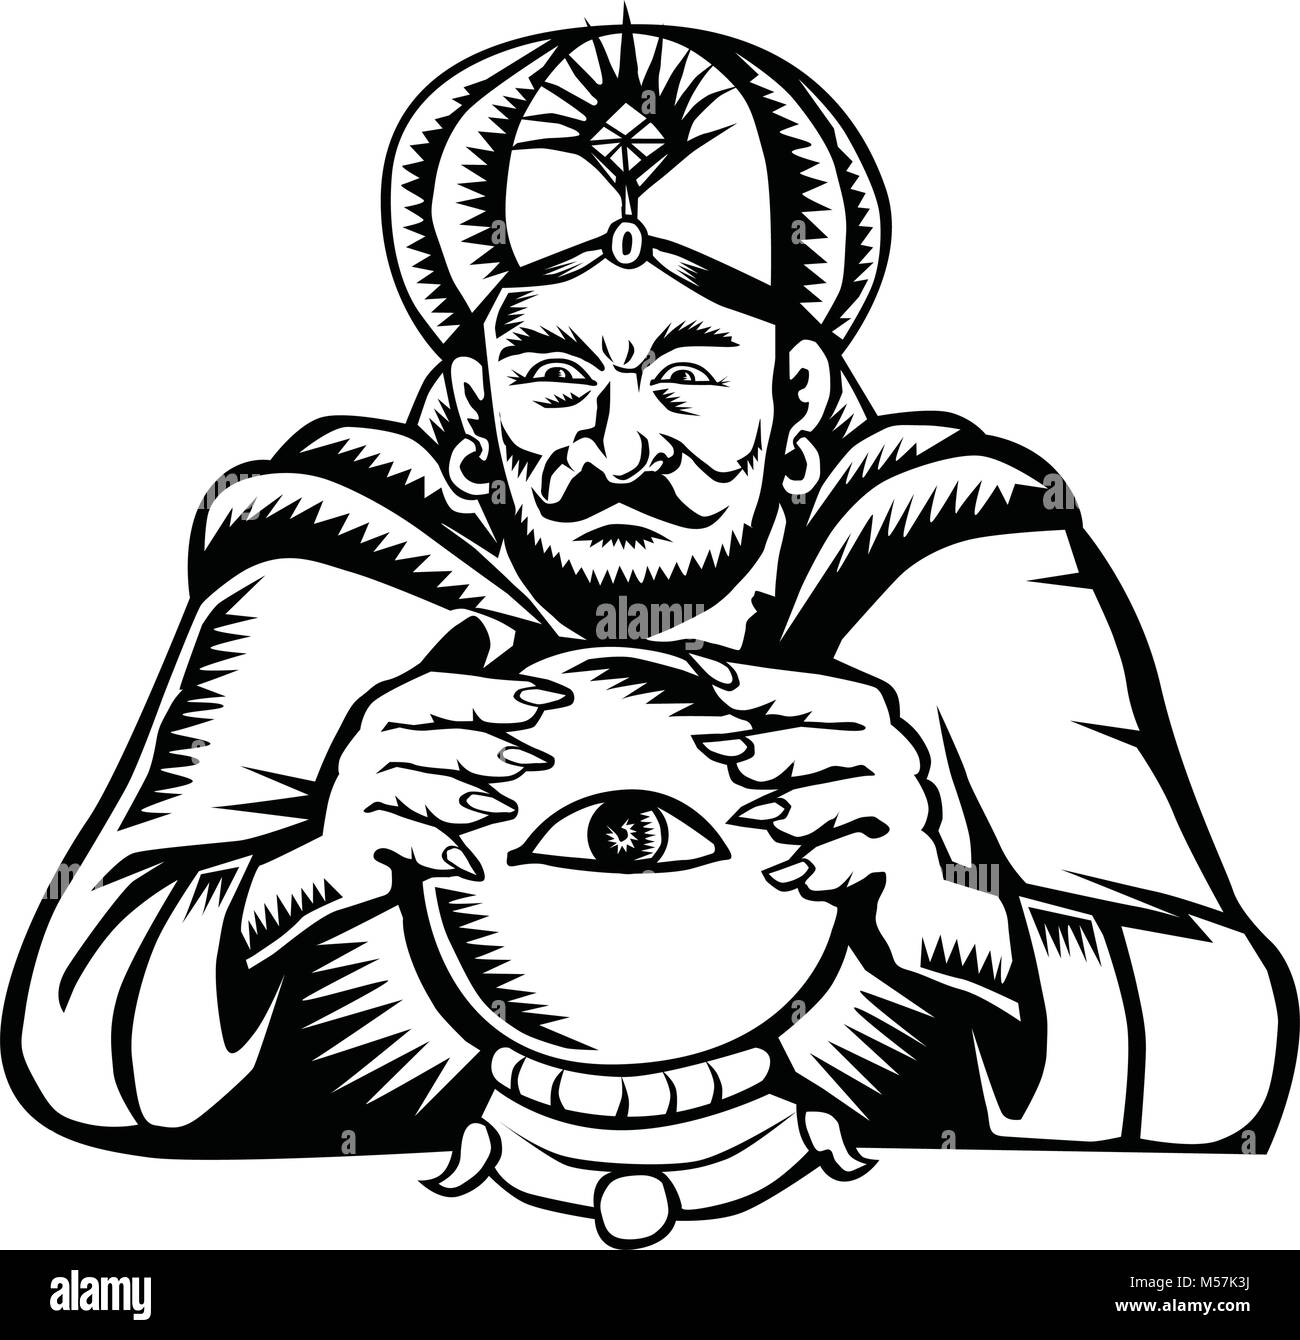 Retro woodcut style illustration of a fortune teller or crystal gazer with hands on crystal ball with eye viewed from front done in black and white. Stock Vector